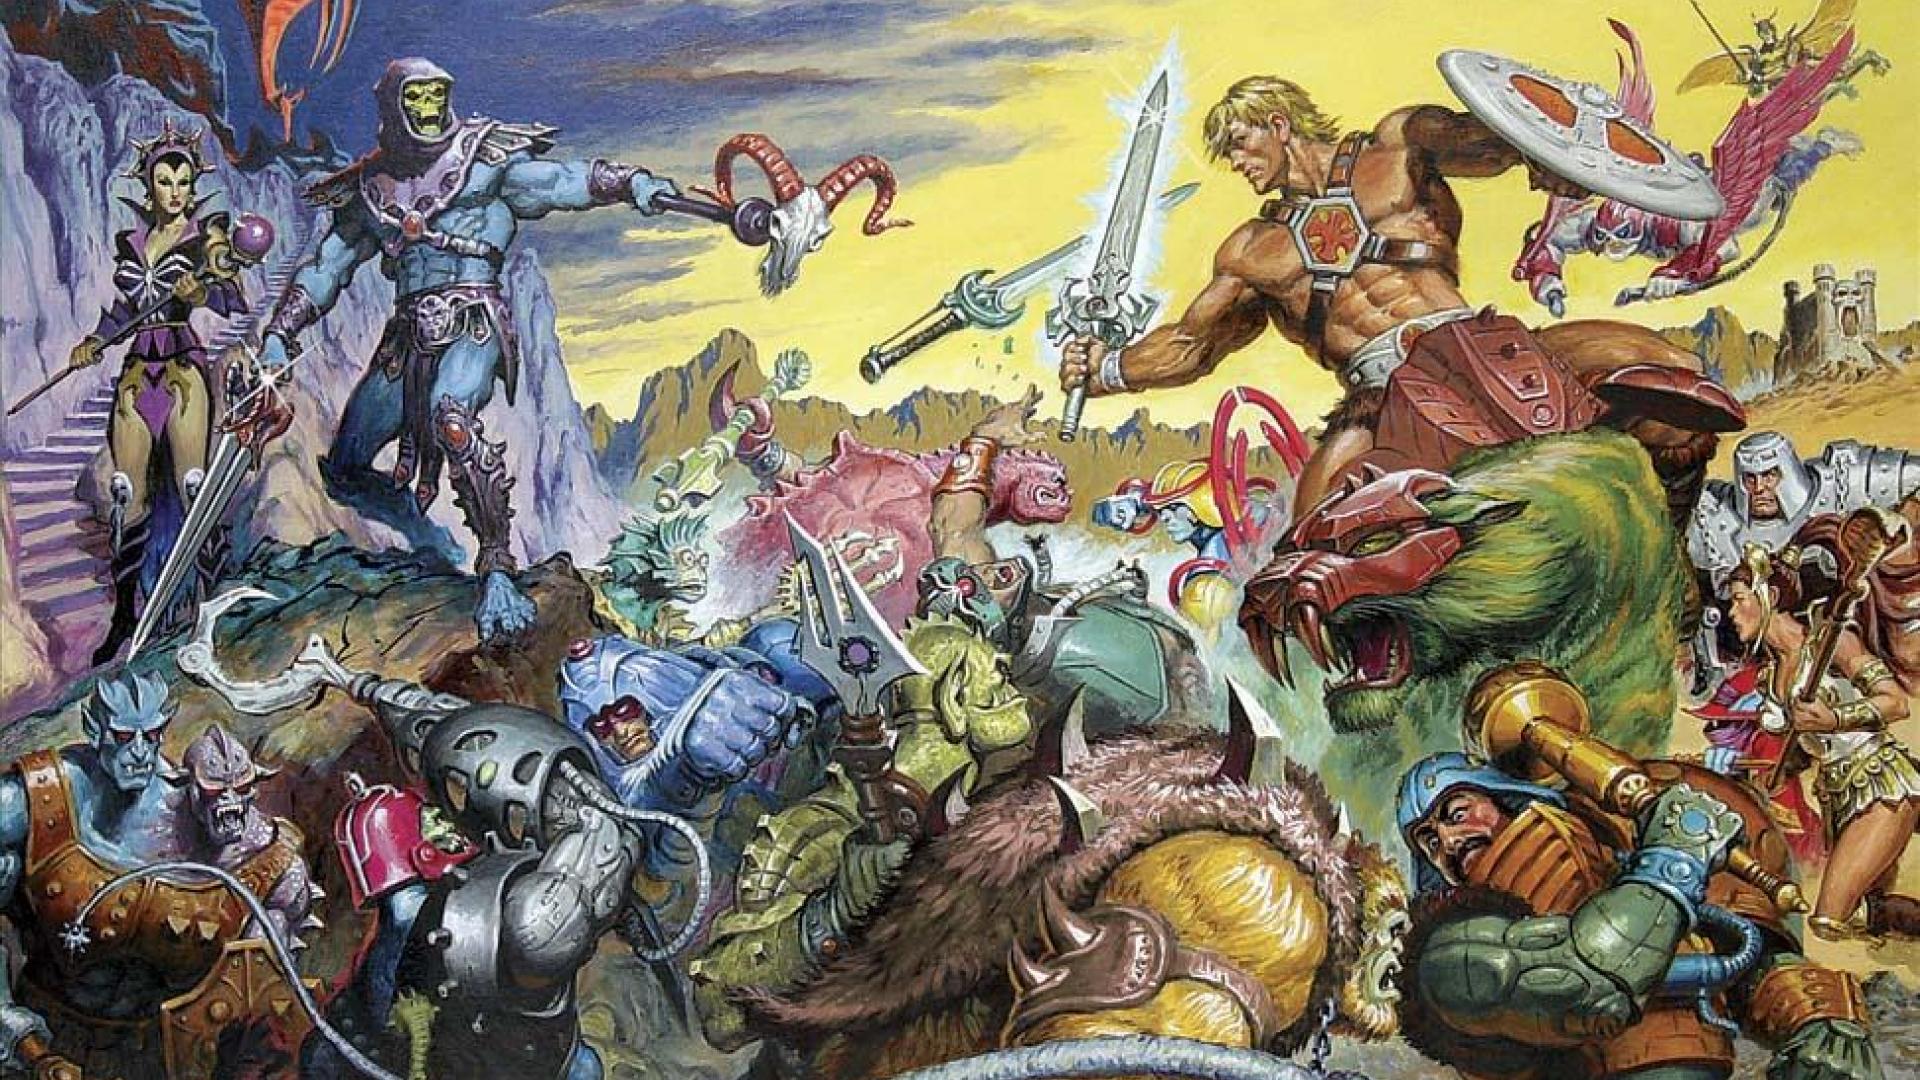 He-Man and The Masters of the Universe - 1920x1080_masters_of_the_universe-180414.jpg